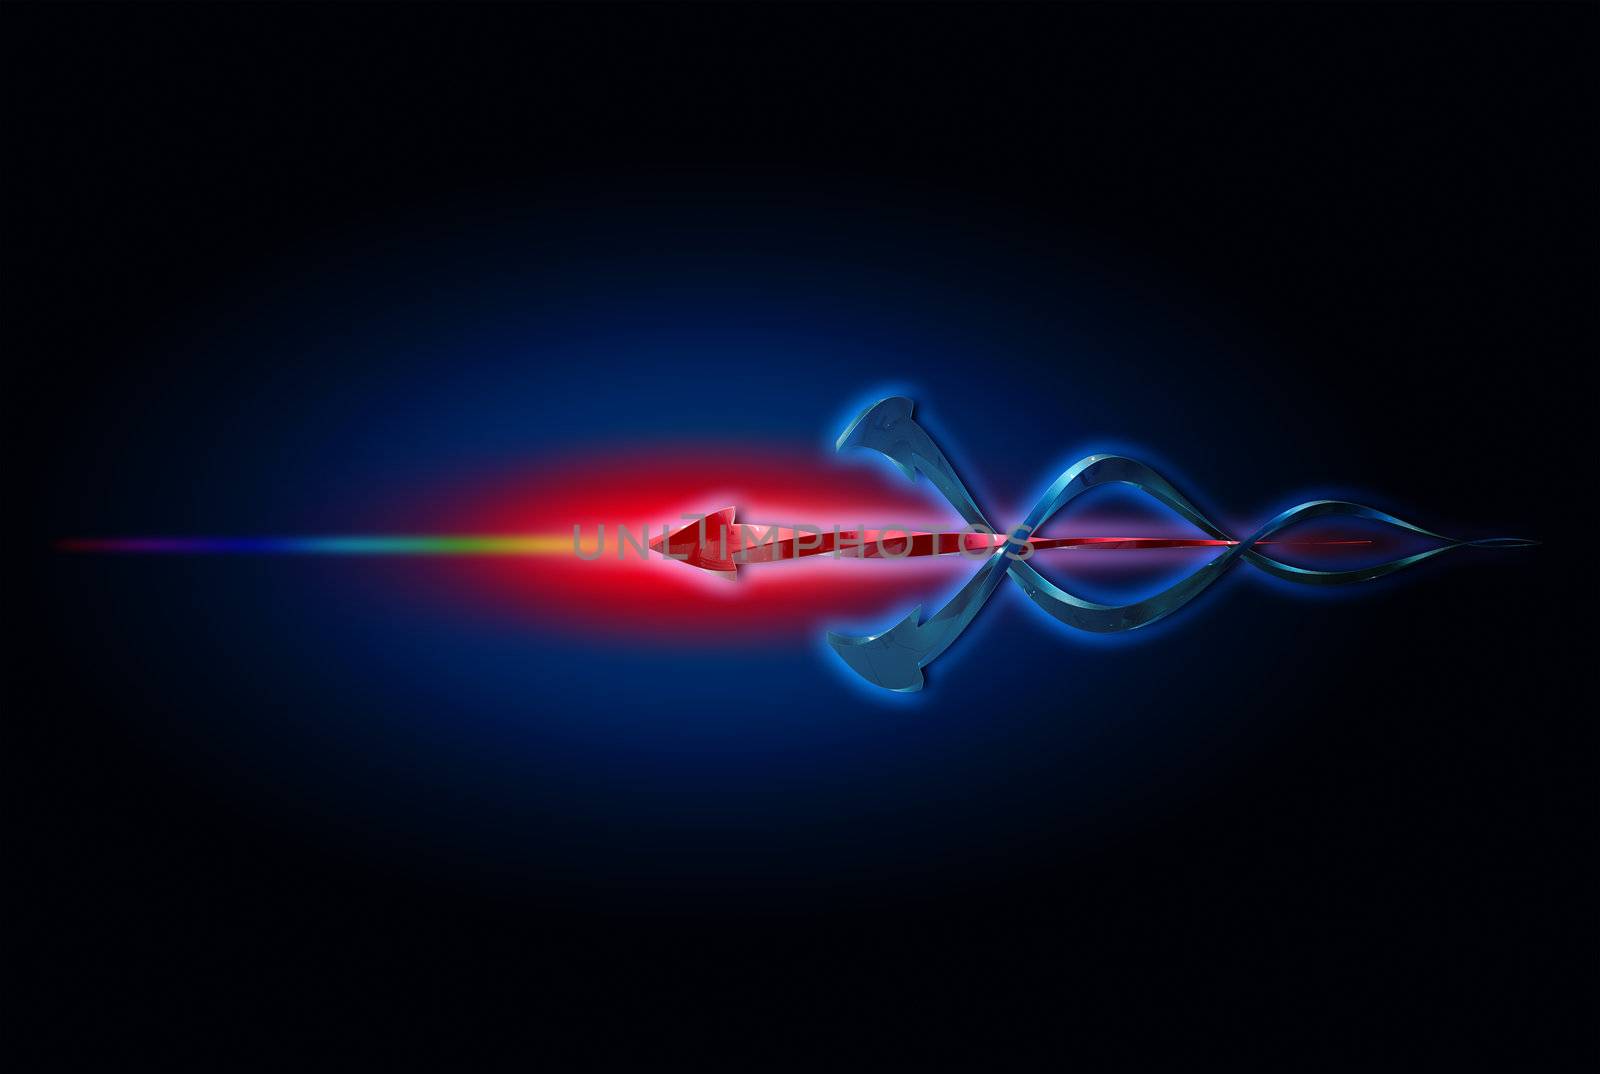 Abstract dark background with red and blue arrows.